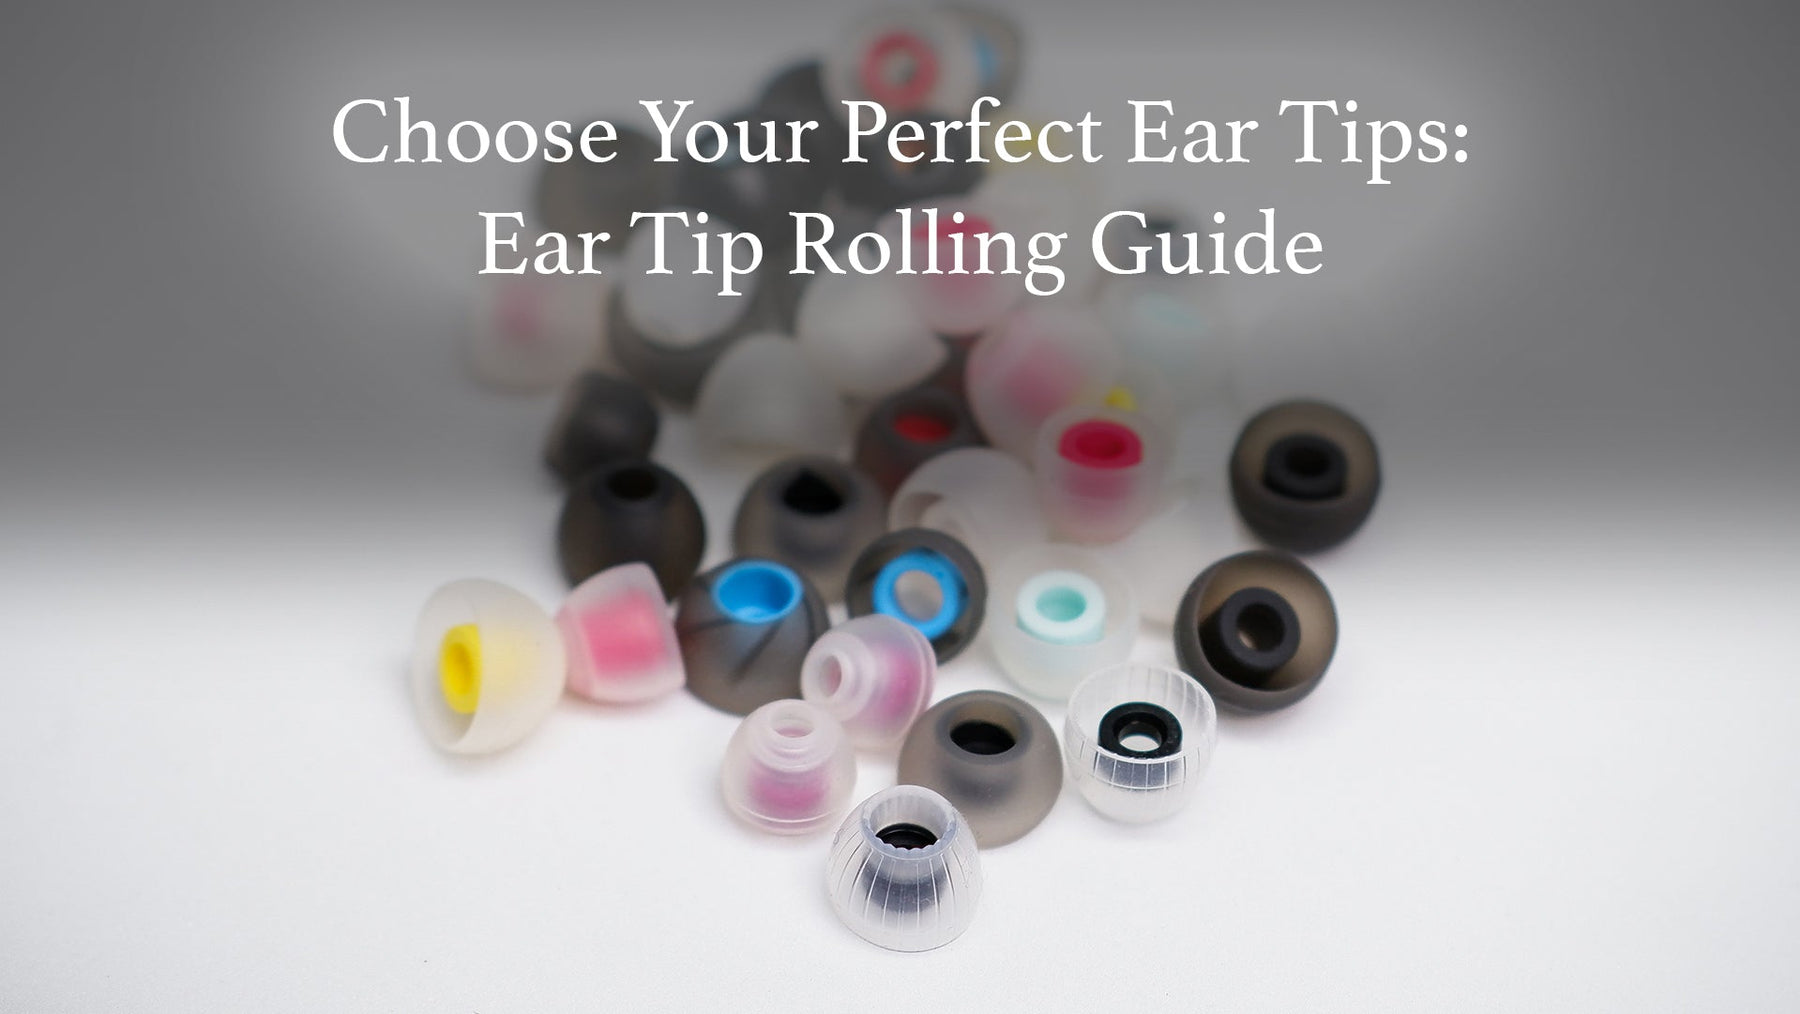 How To Find The Perfect Pair Of Ear Tips: An Easy Ear Tip Guide